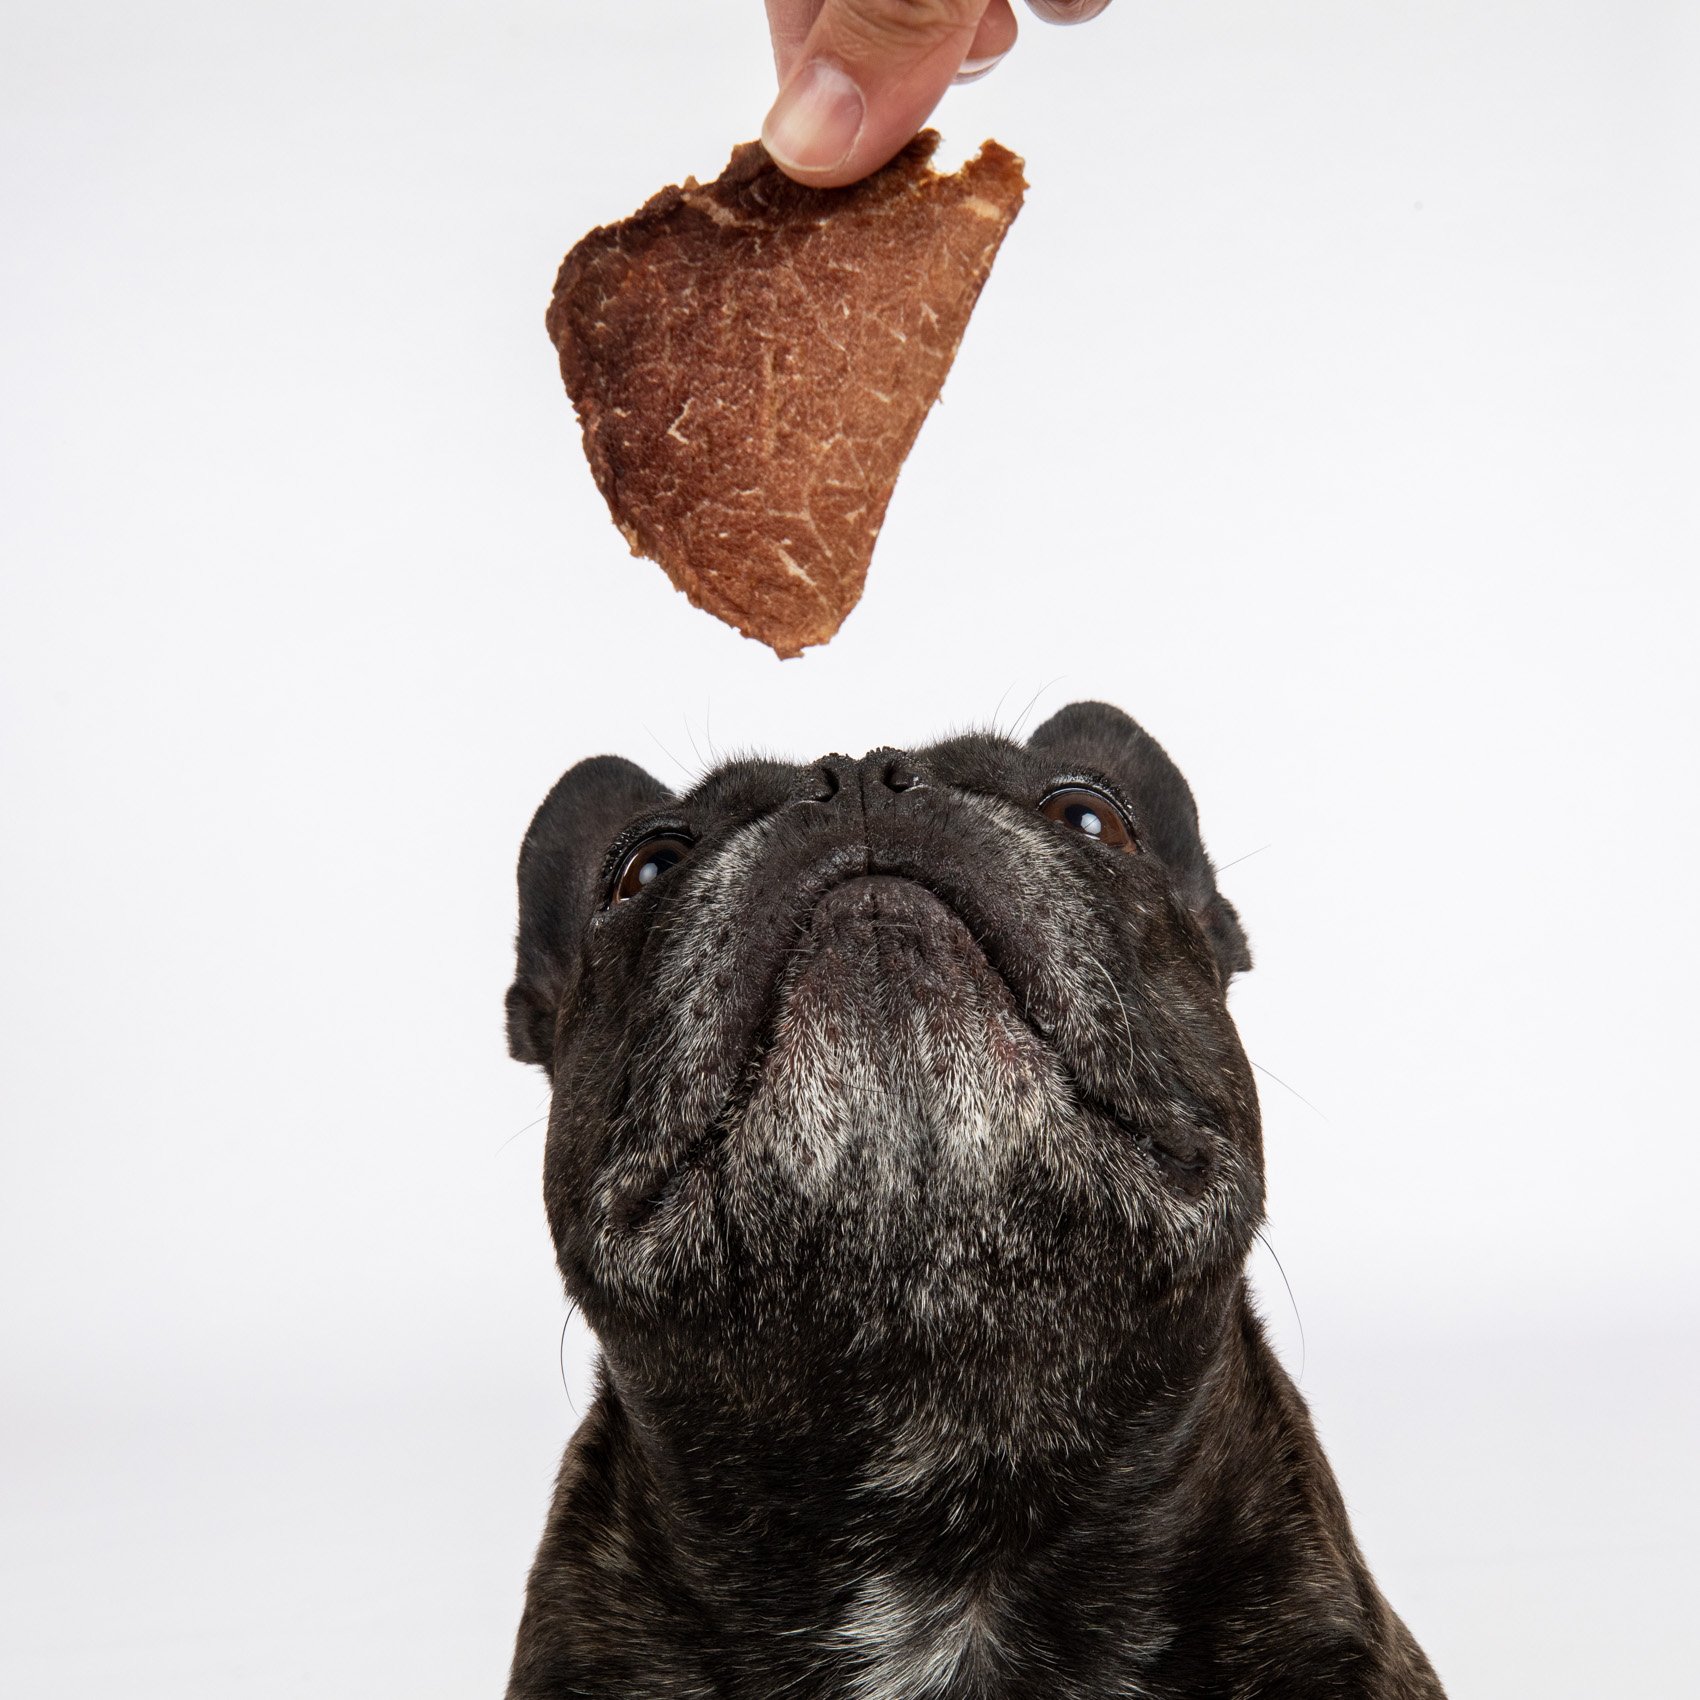 Pet Product Photography | Dog Looking at Treat by Mark Rogers